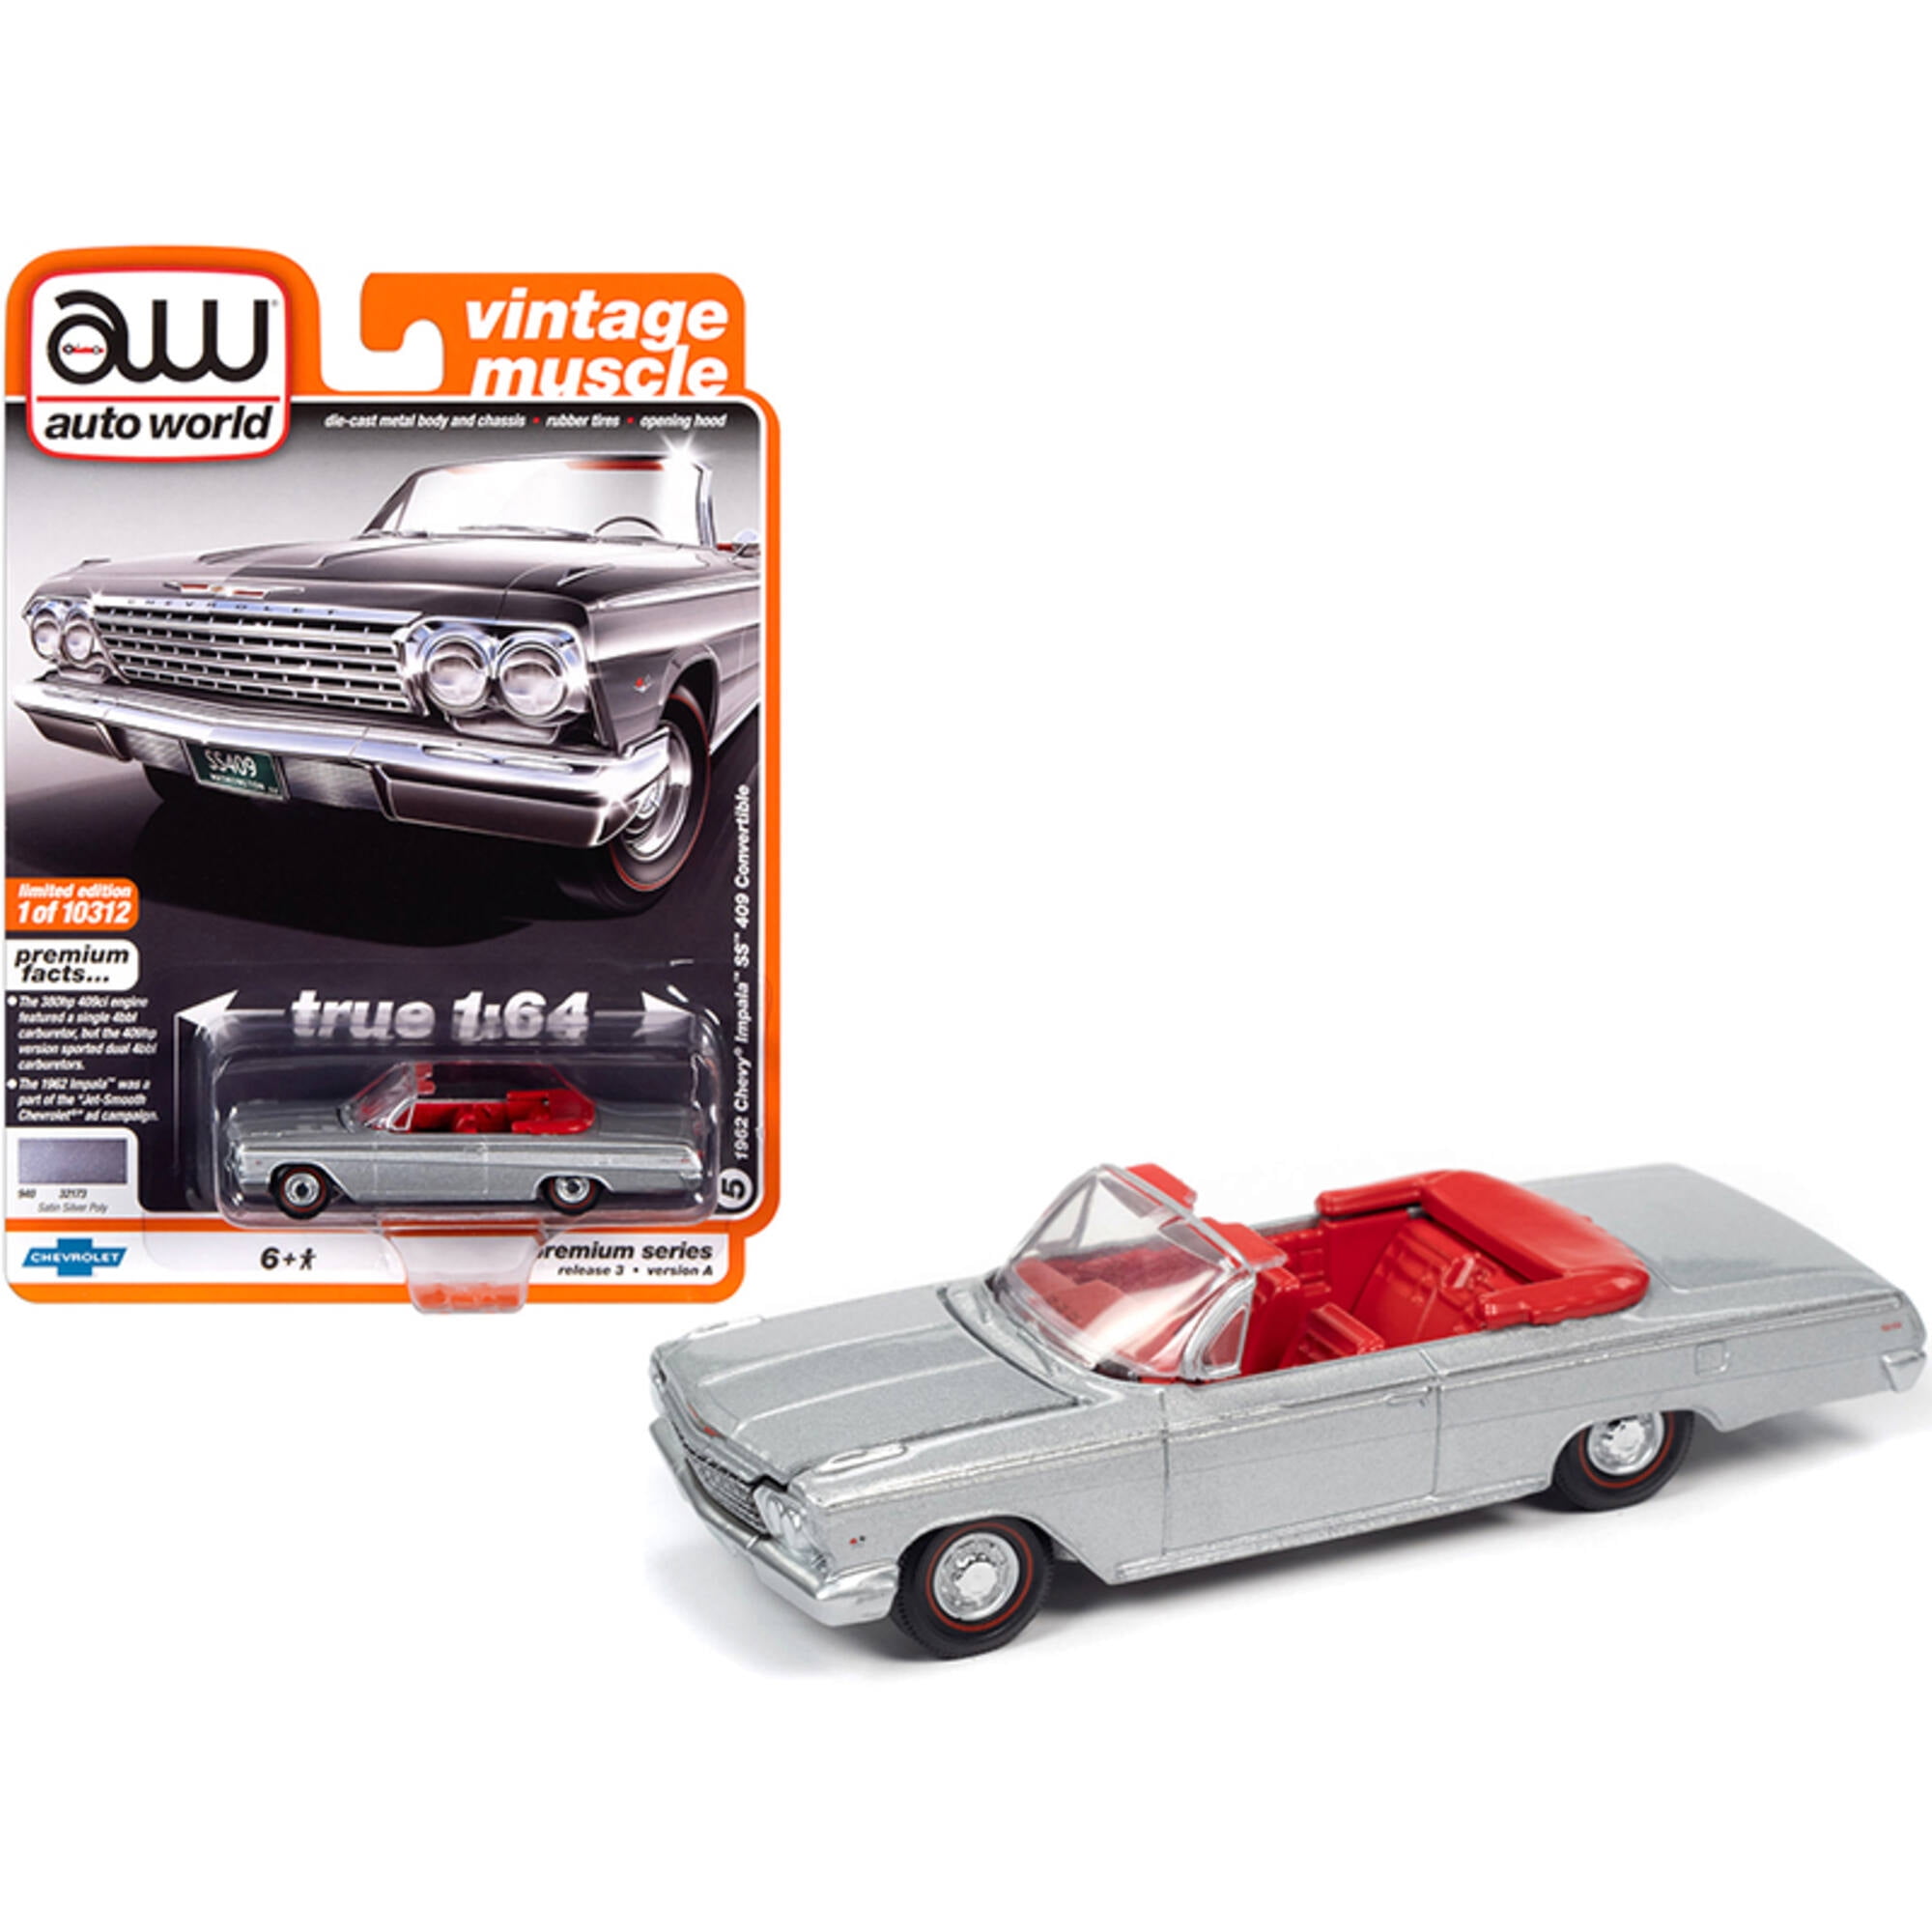 Picture of Autoworld 64262-AWSP045A 1-64 Scale 1962 Chevrolet Impala SS 409 Convertible Satin Silver Metallic & Red Interior Muscle Truck Diecast Model Car - 10312 Piece